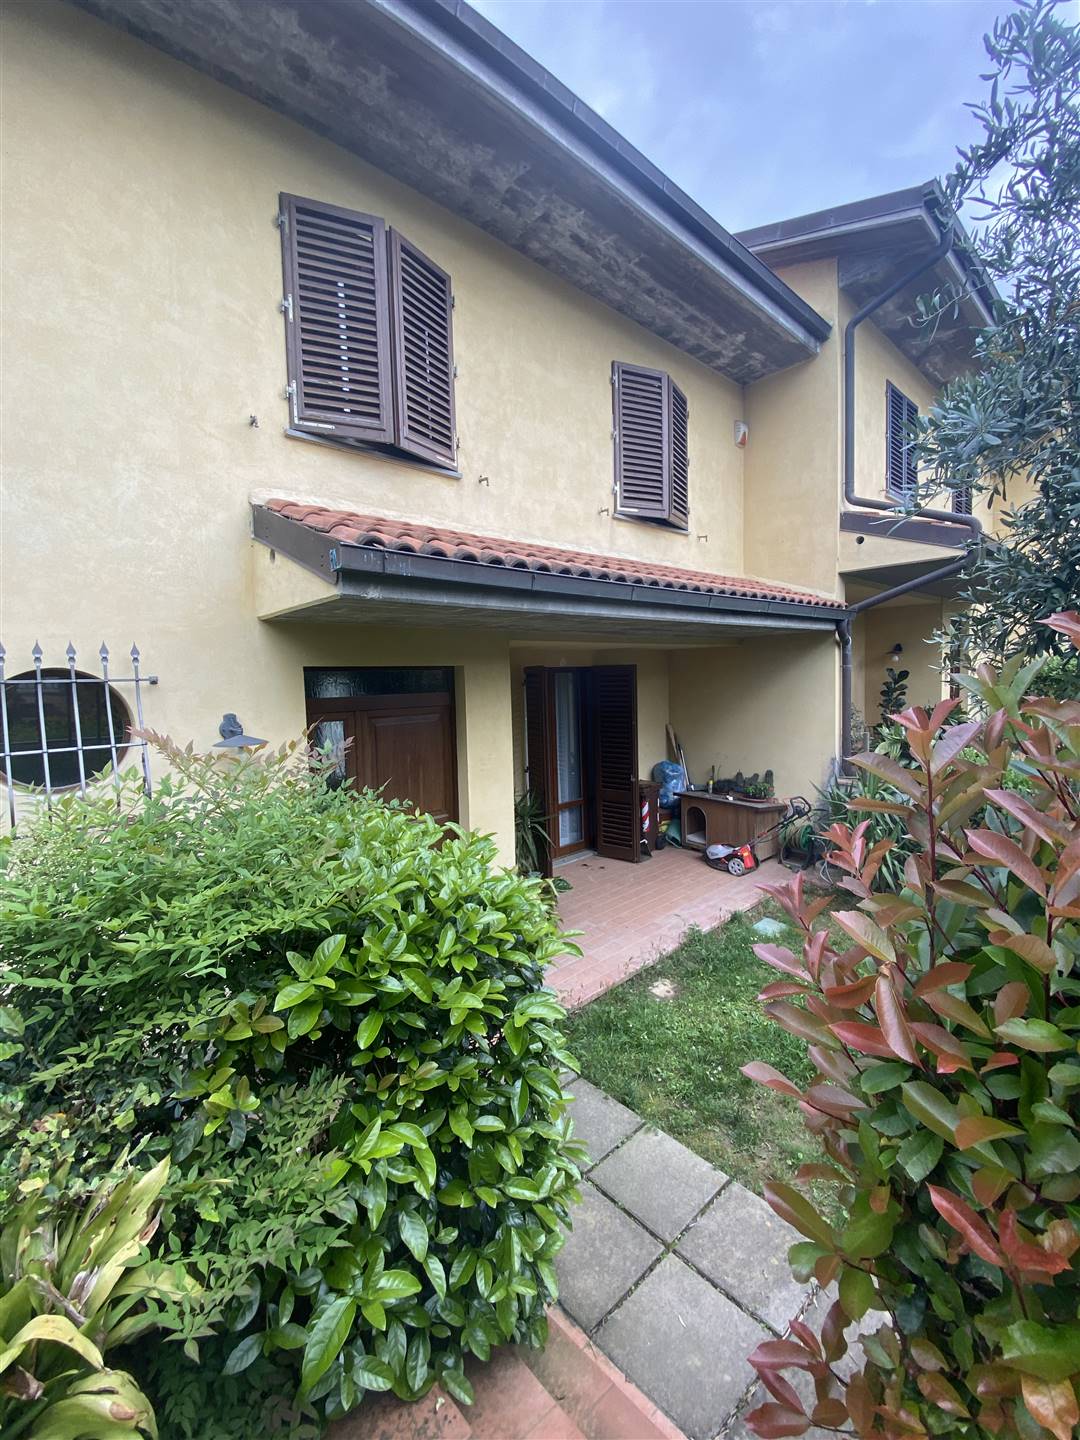 Malmantile - Perfect little villa with front, and back garden, with garage and terraces. This newly built villino is perfect and ready to be lived in;